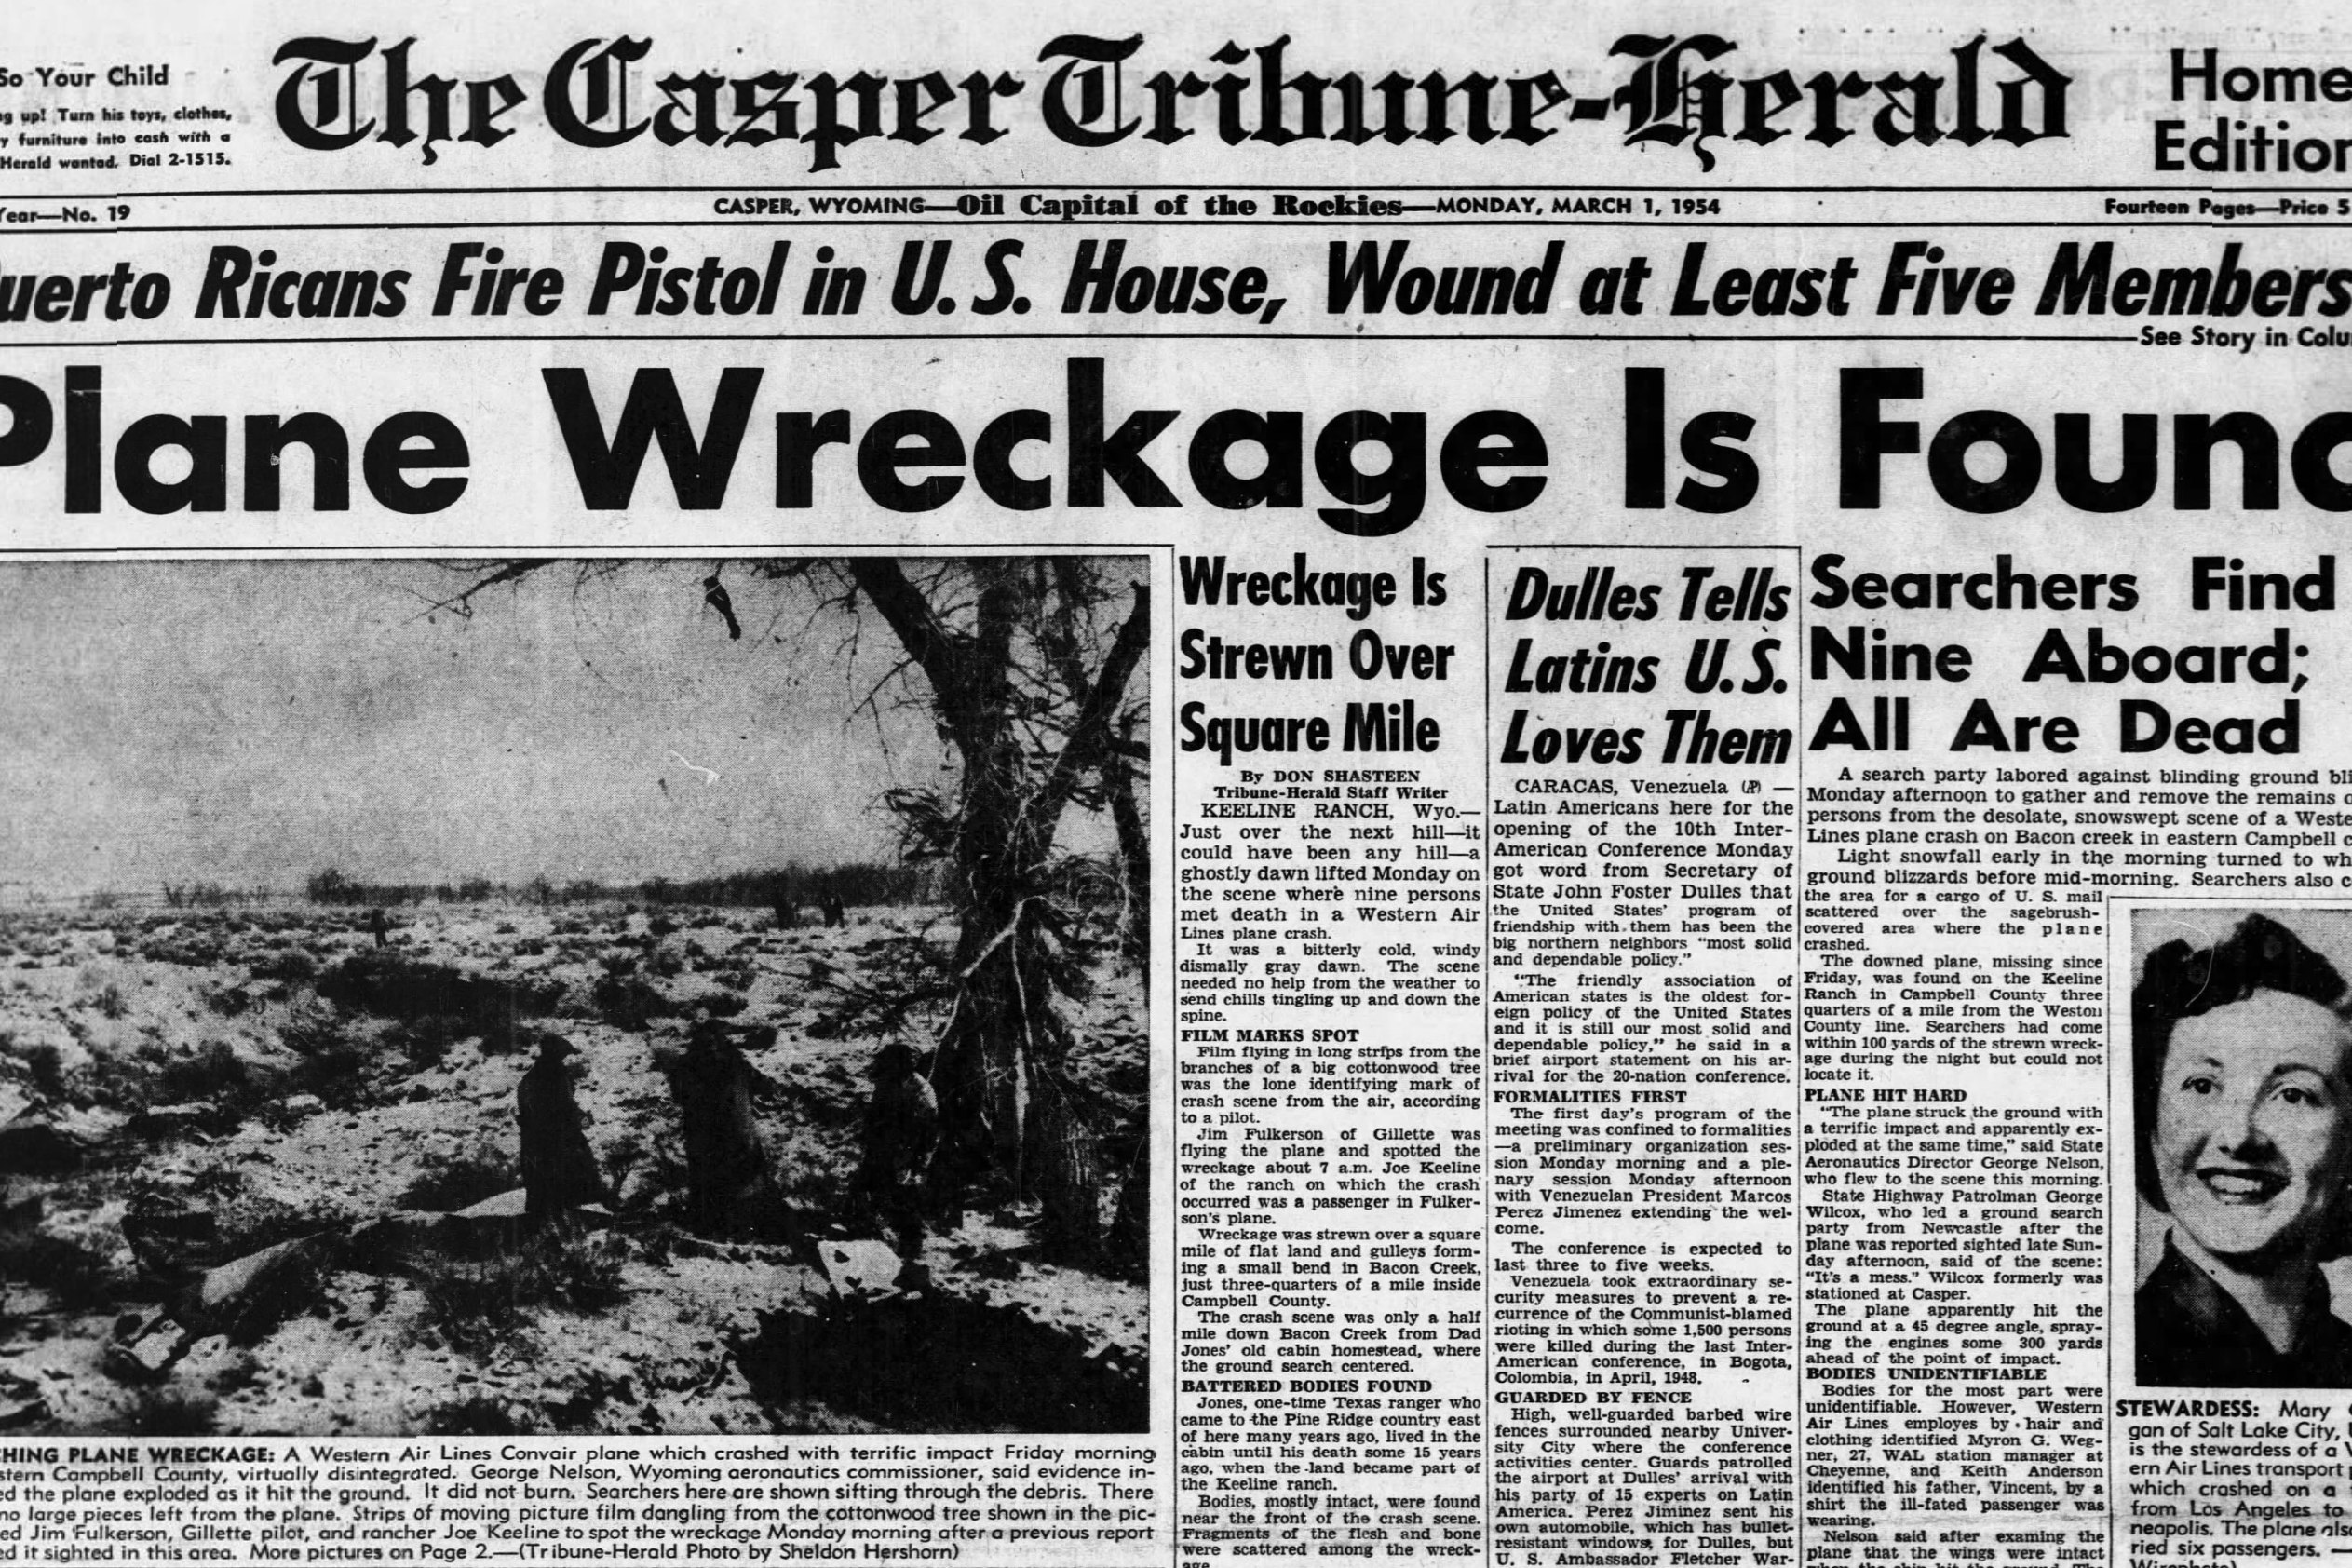 The Casper Tribune-Herald front page reports the tragic plane crash wreckage has been discovered on March 1, 1954.